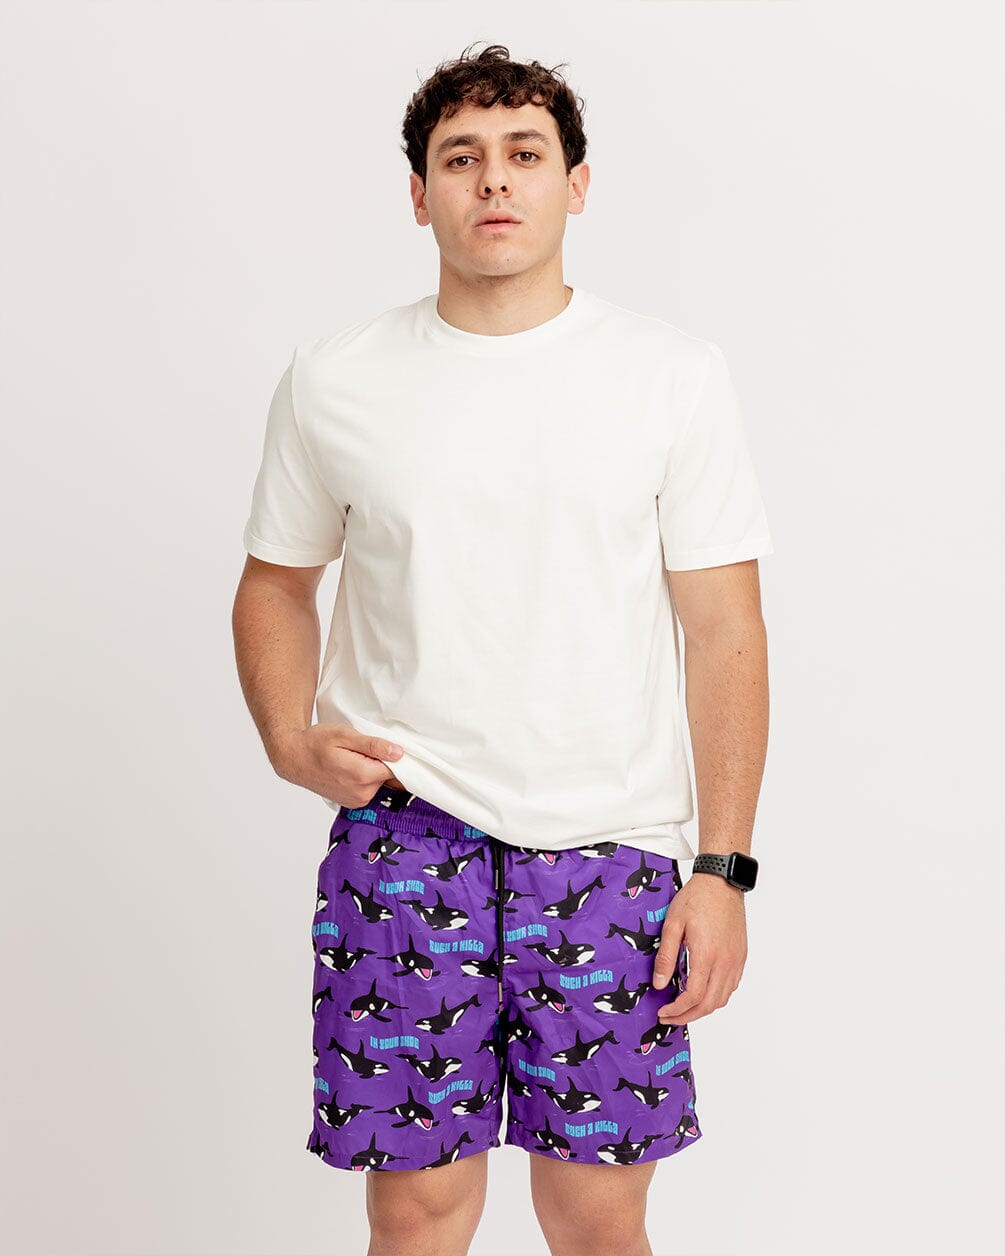 Whalesss - Swim Shorts Swim Shorts IN YOUR SHOE 